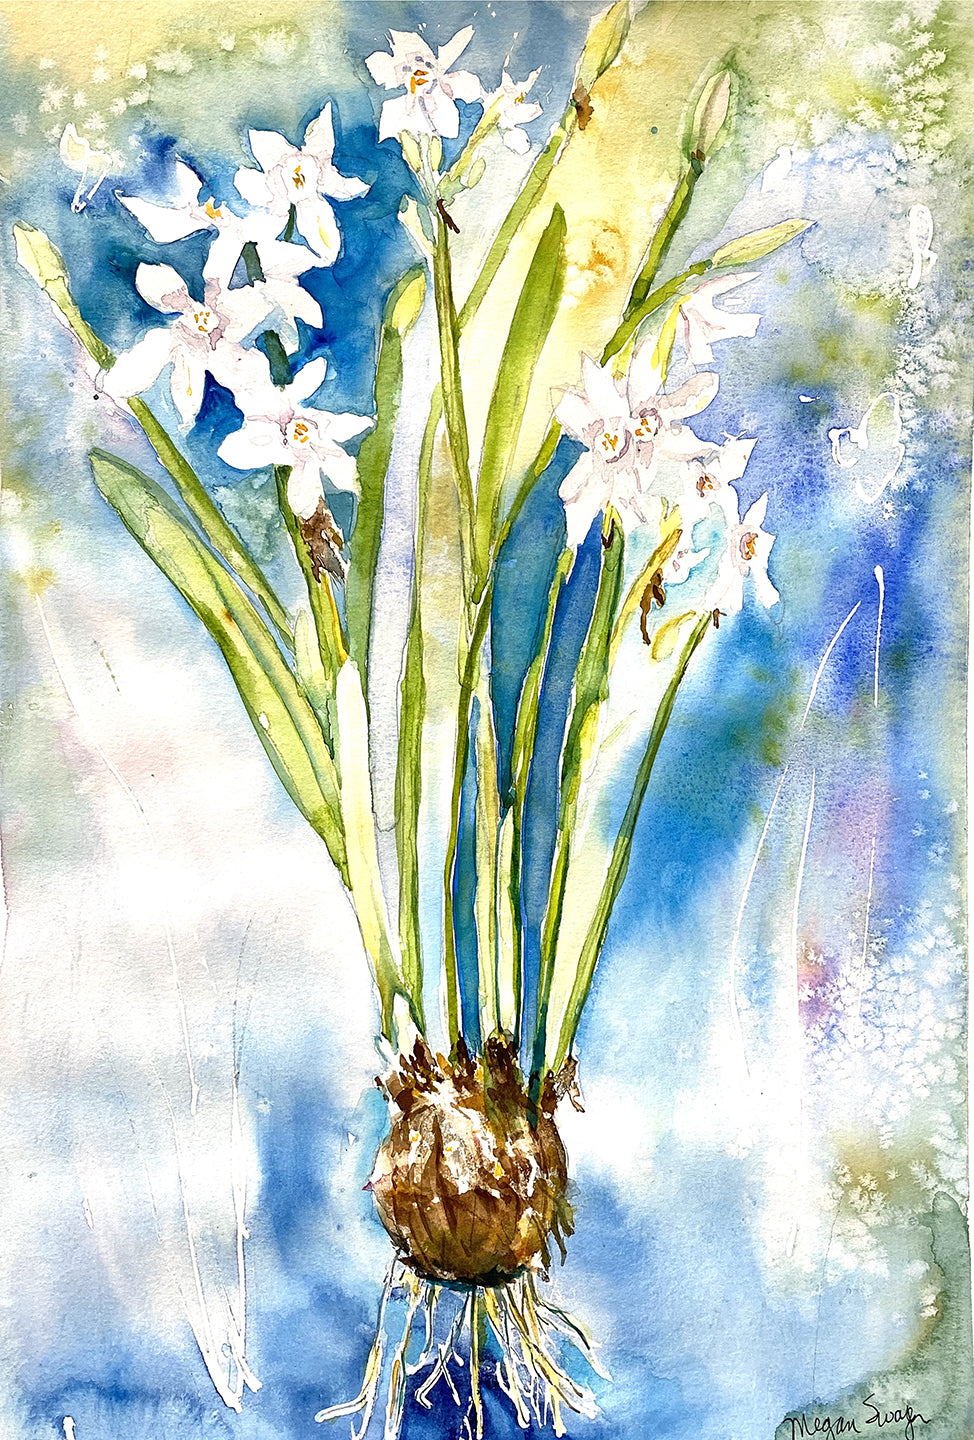 Paperwhites Showing Bulb - Watercolor